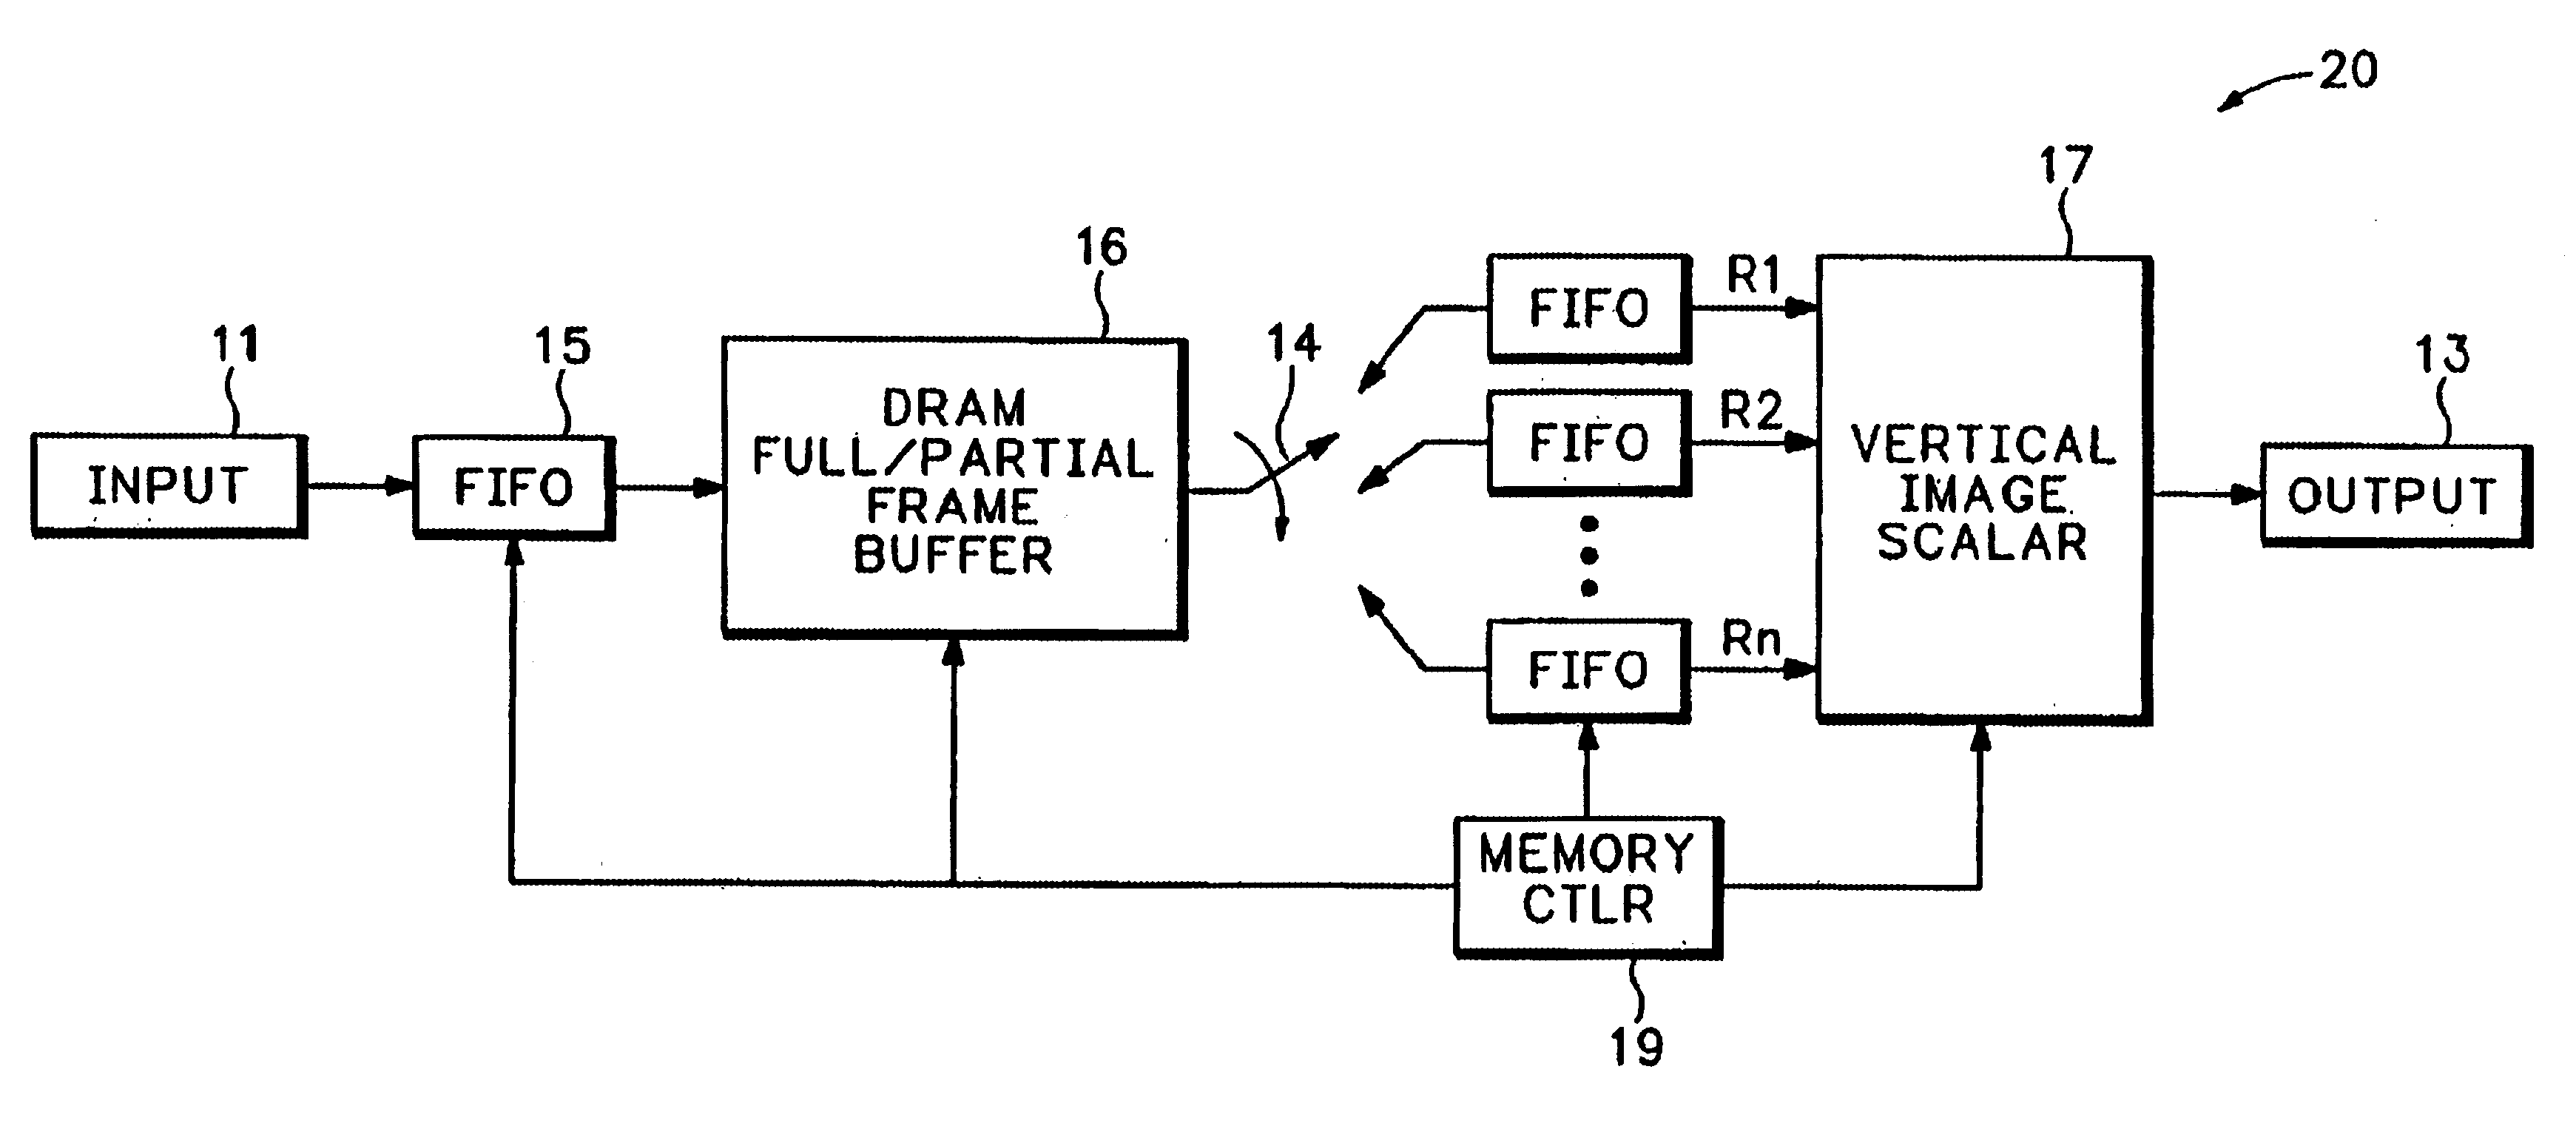 Ultra-high bandwidth multi-port memory system for image scaling applications